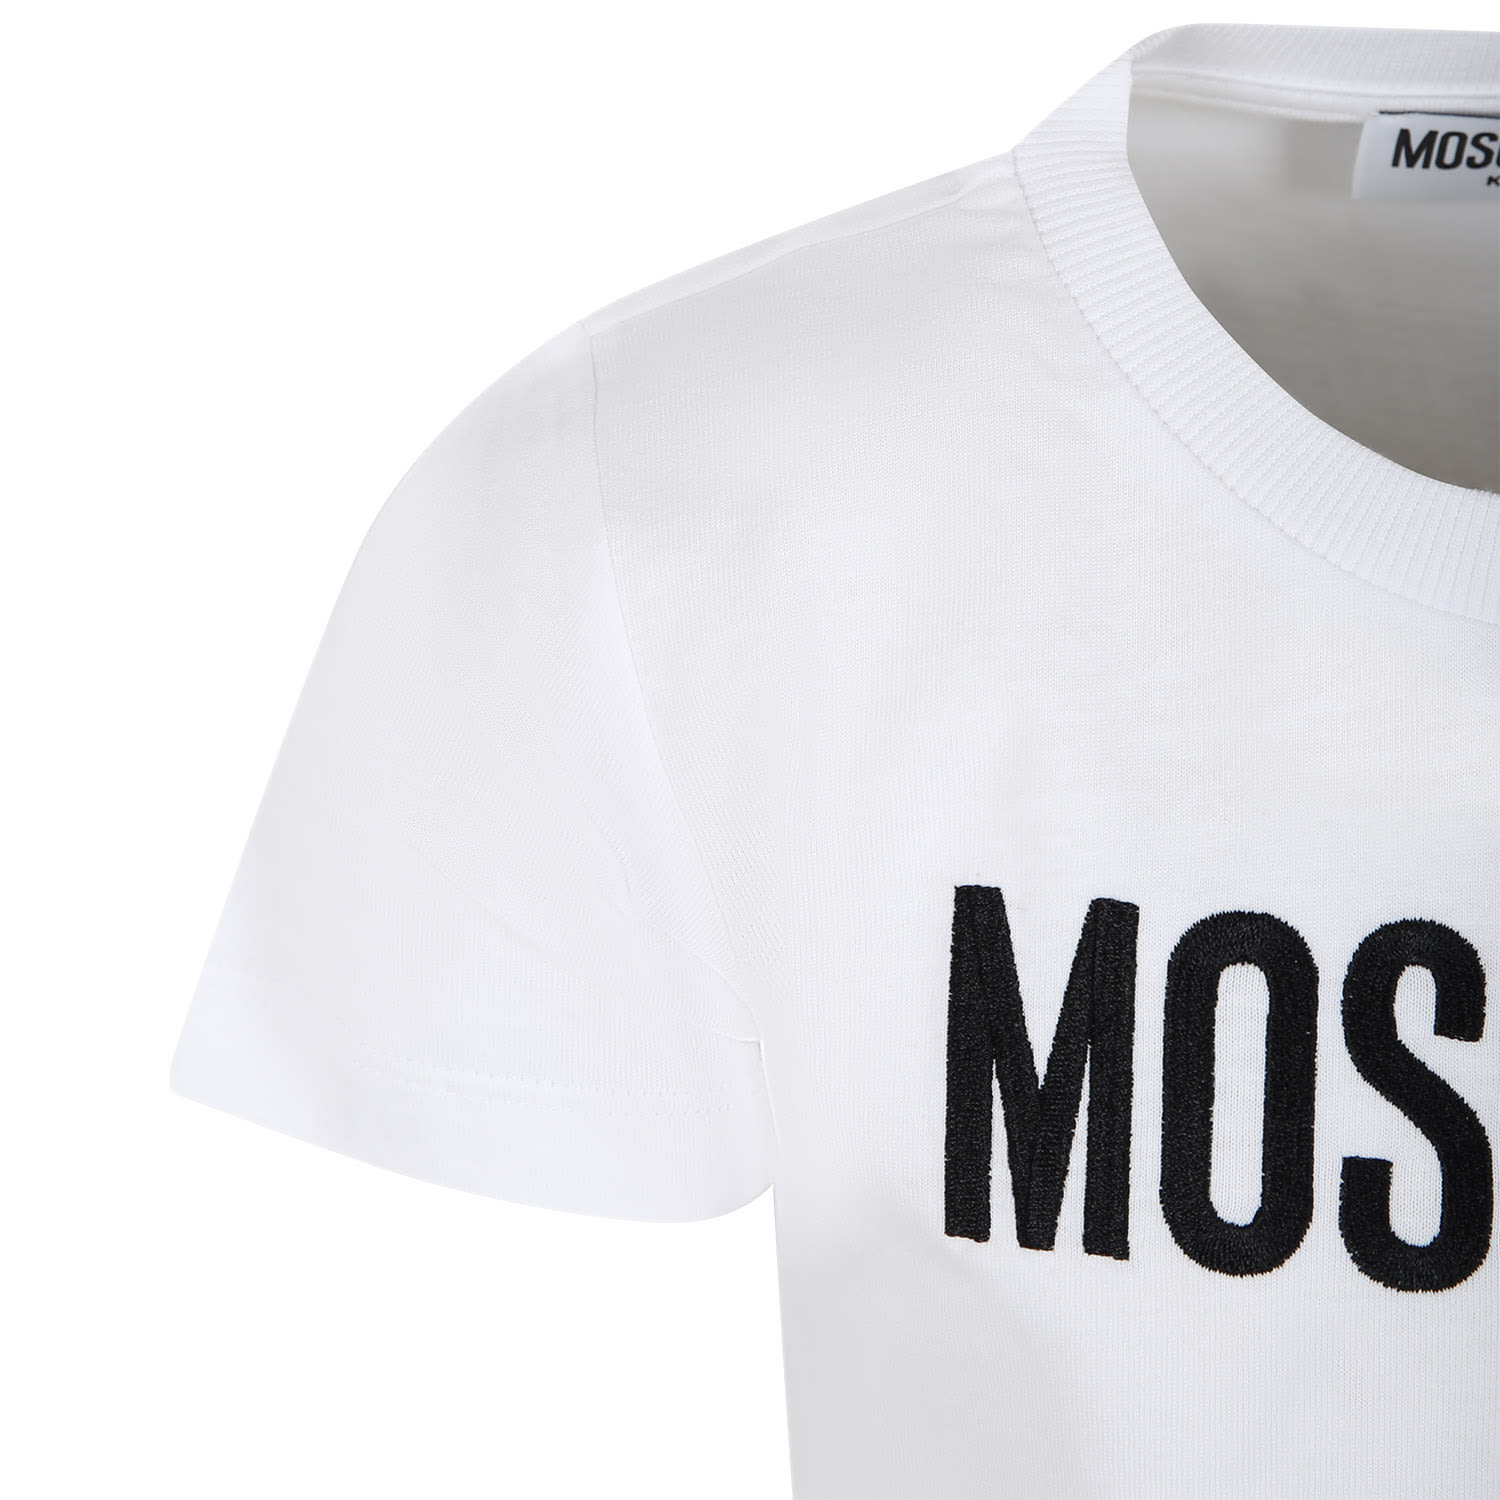 Shop Moschino White T-shirt For Girl With Logo And Red Heart